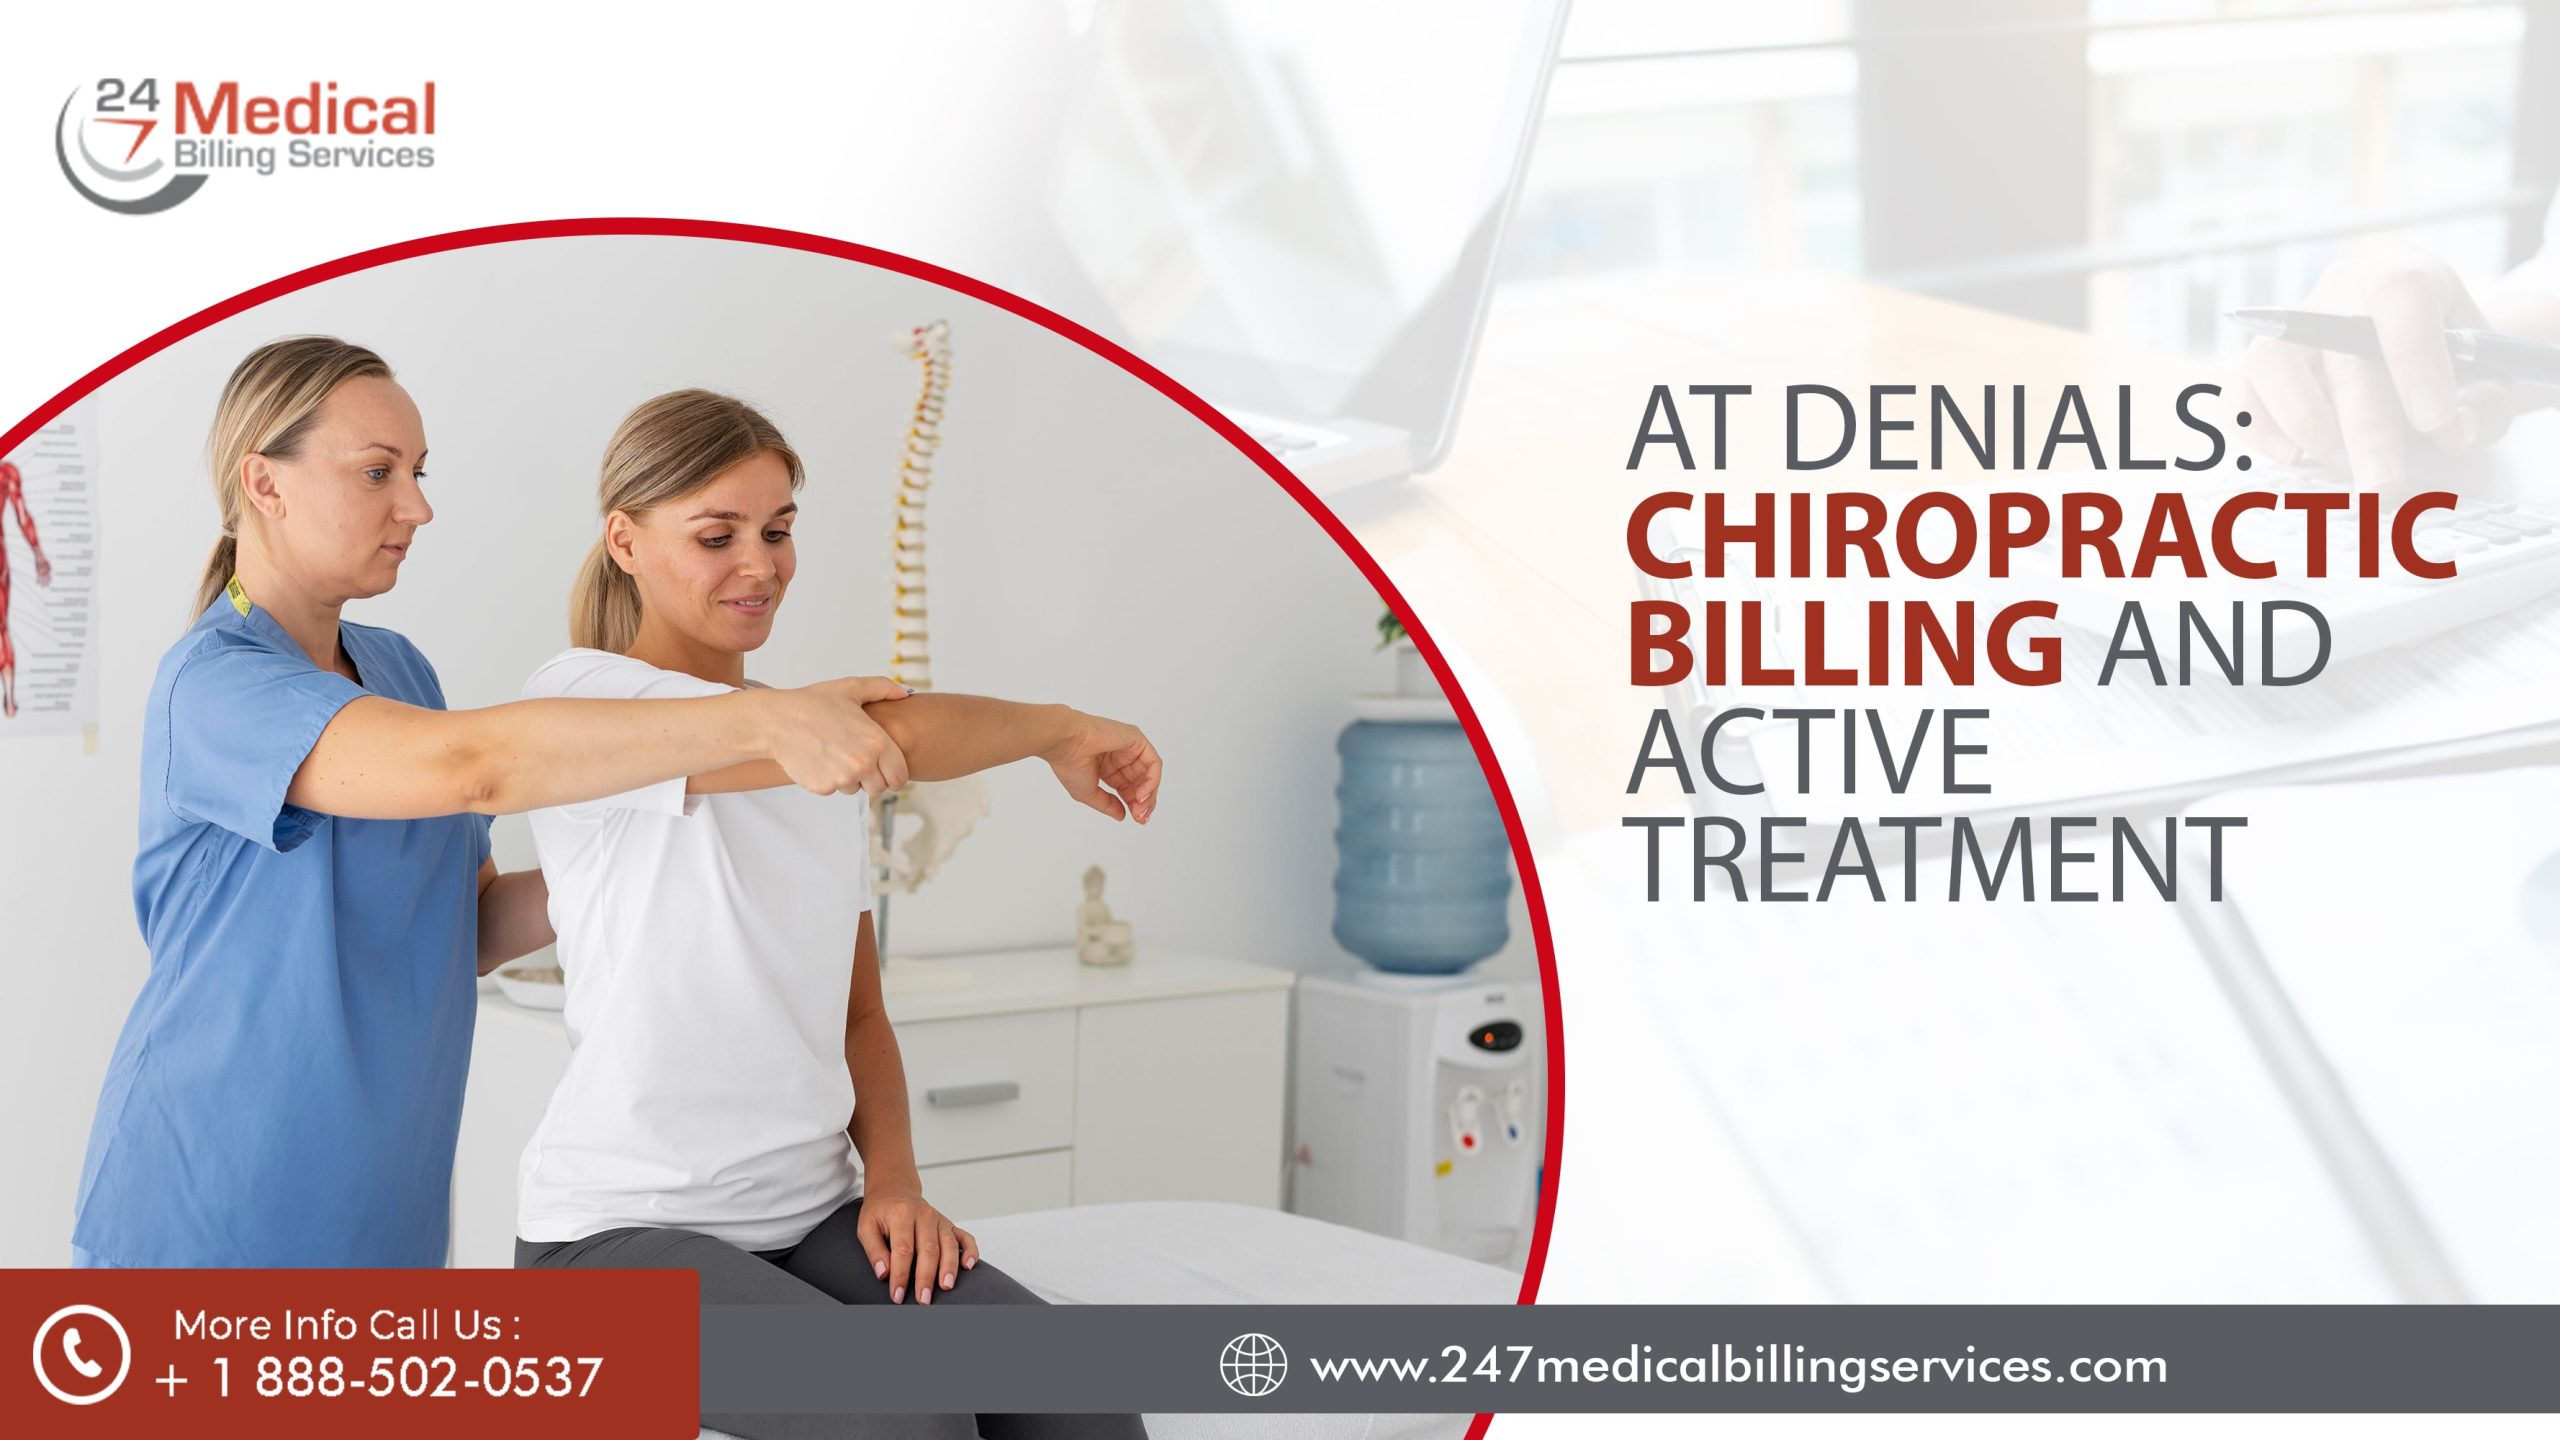  AT Denials: Chiropractic Billing and Active Treatment